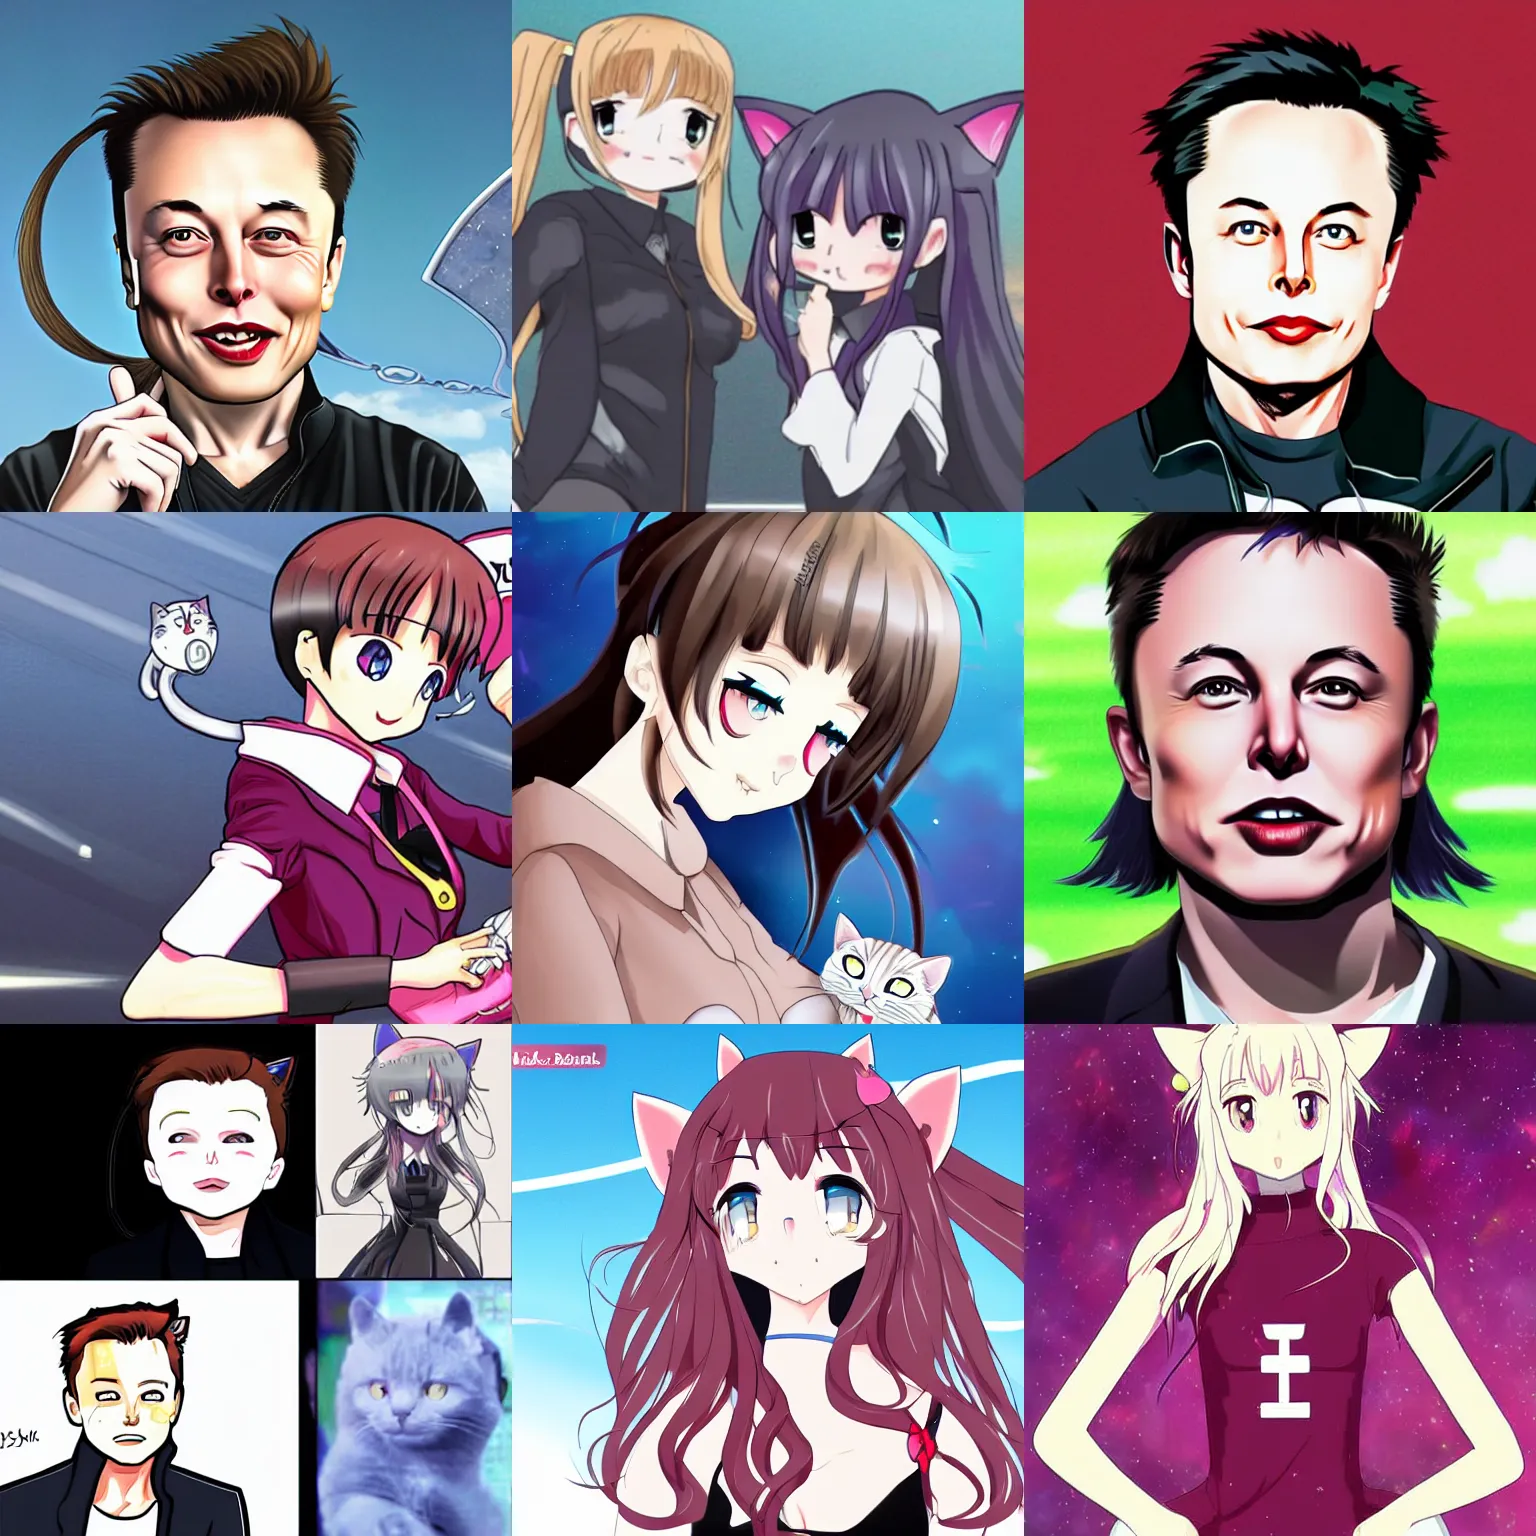 Prompt: elon musk as cat girl anime style